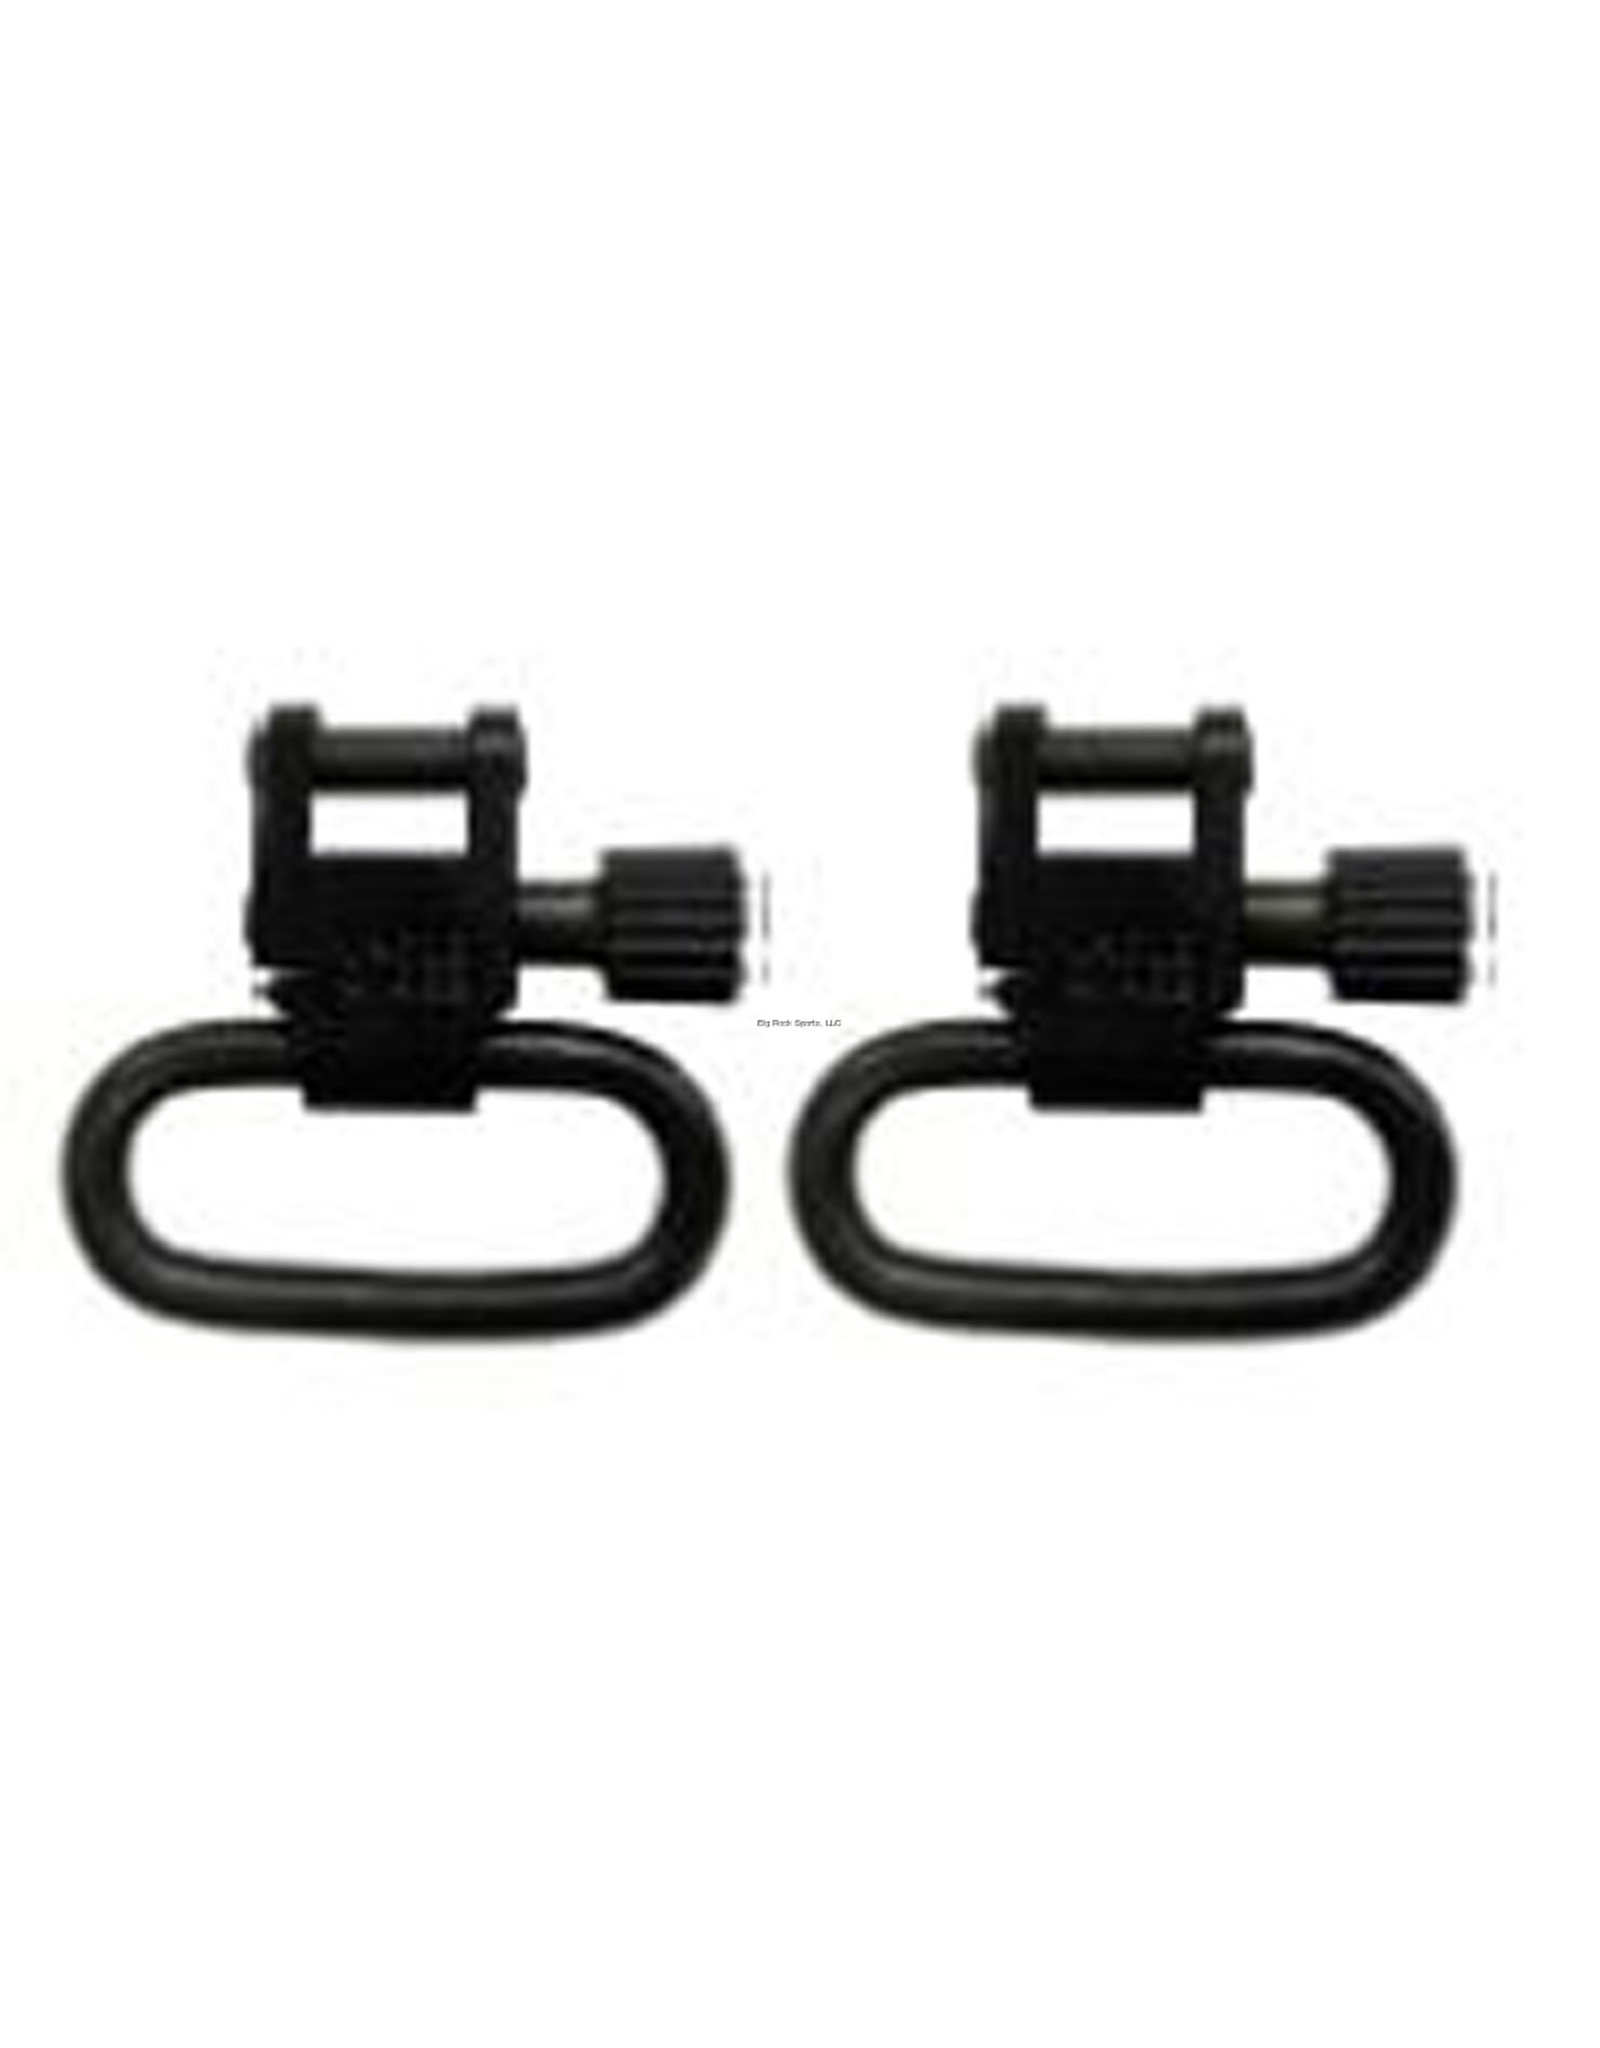 HQ Outfitters HQ Outfitters - Quick detach Sling Swivel set 1"